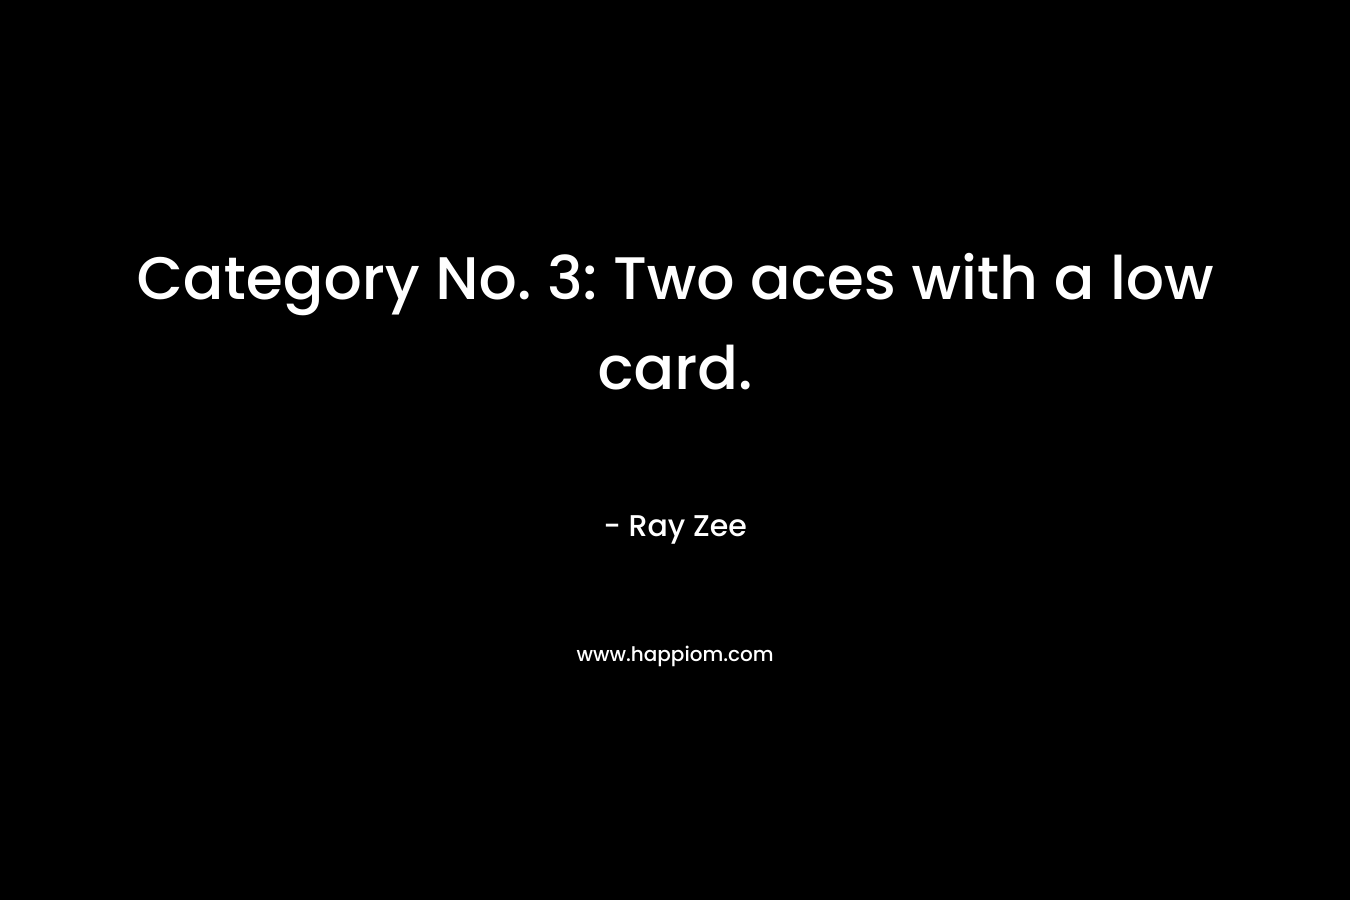 Category No. 3: Two aces with a low card.